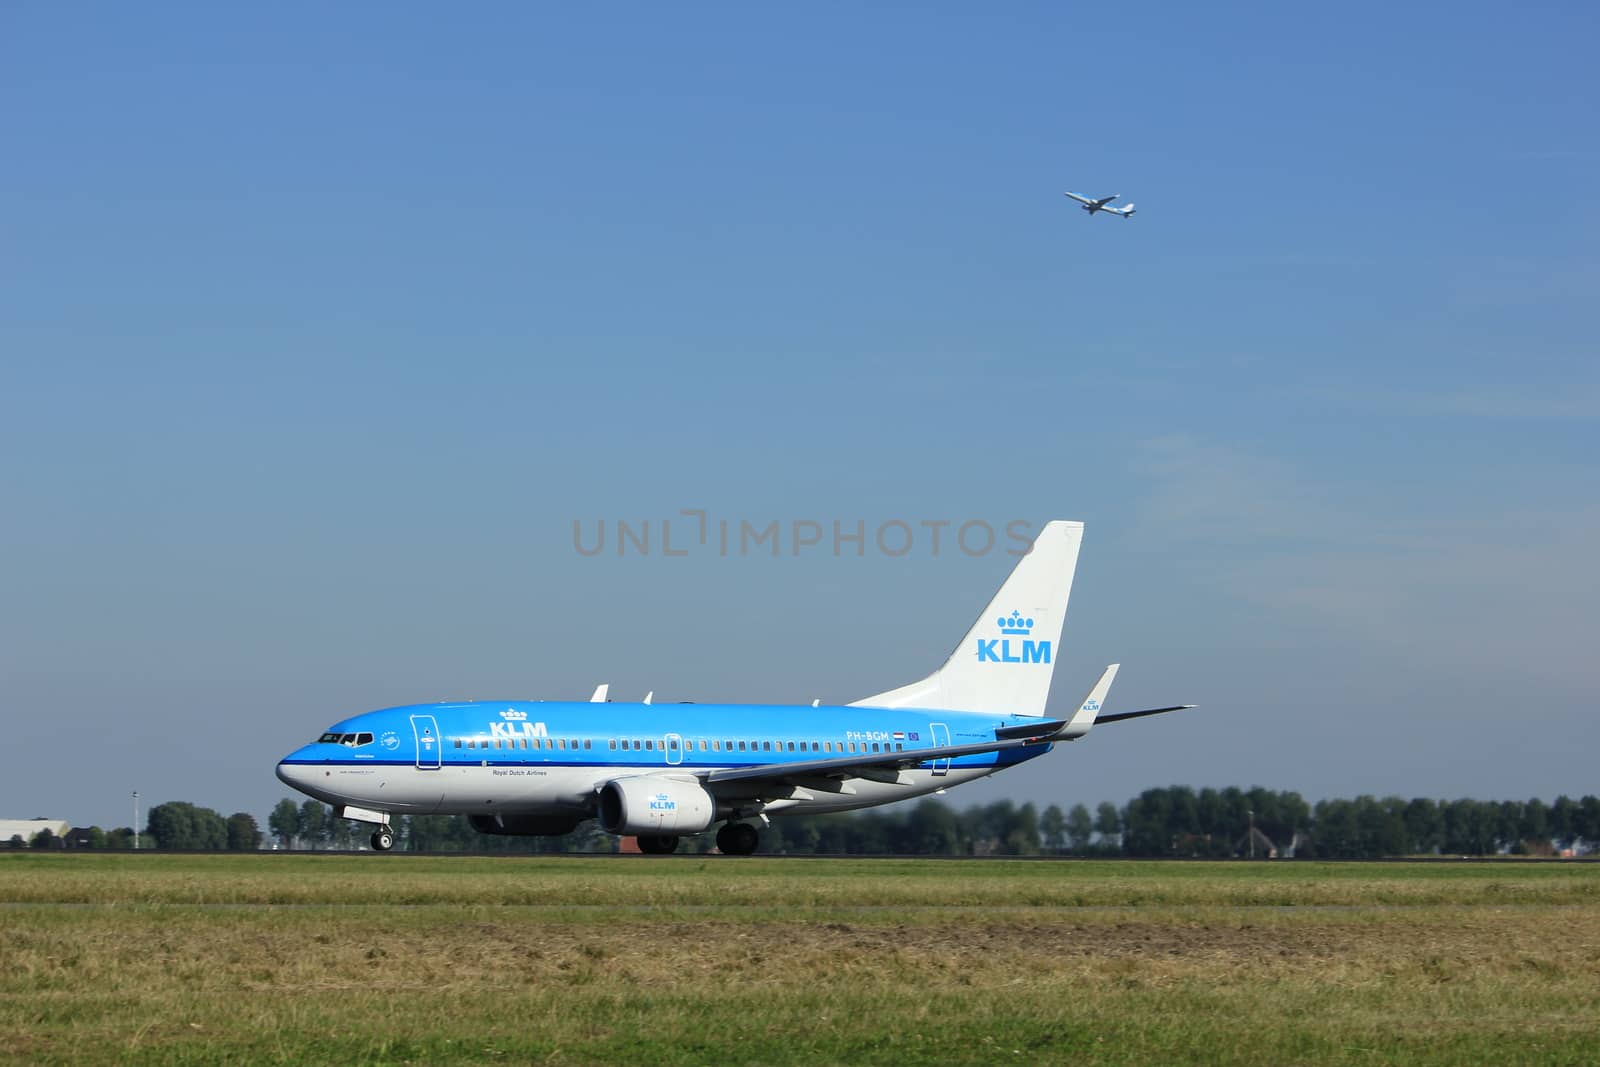 Amsterdam, the Netherlands  - August, 18th 2016: PH-BGM KLM Royal Dutch Airlines Boeing 737,
taking off from Polderbaan Runway Amsterdam Airport Schiphol